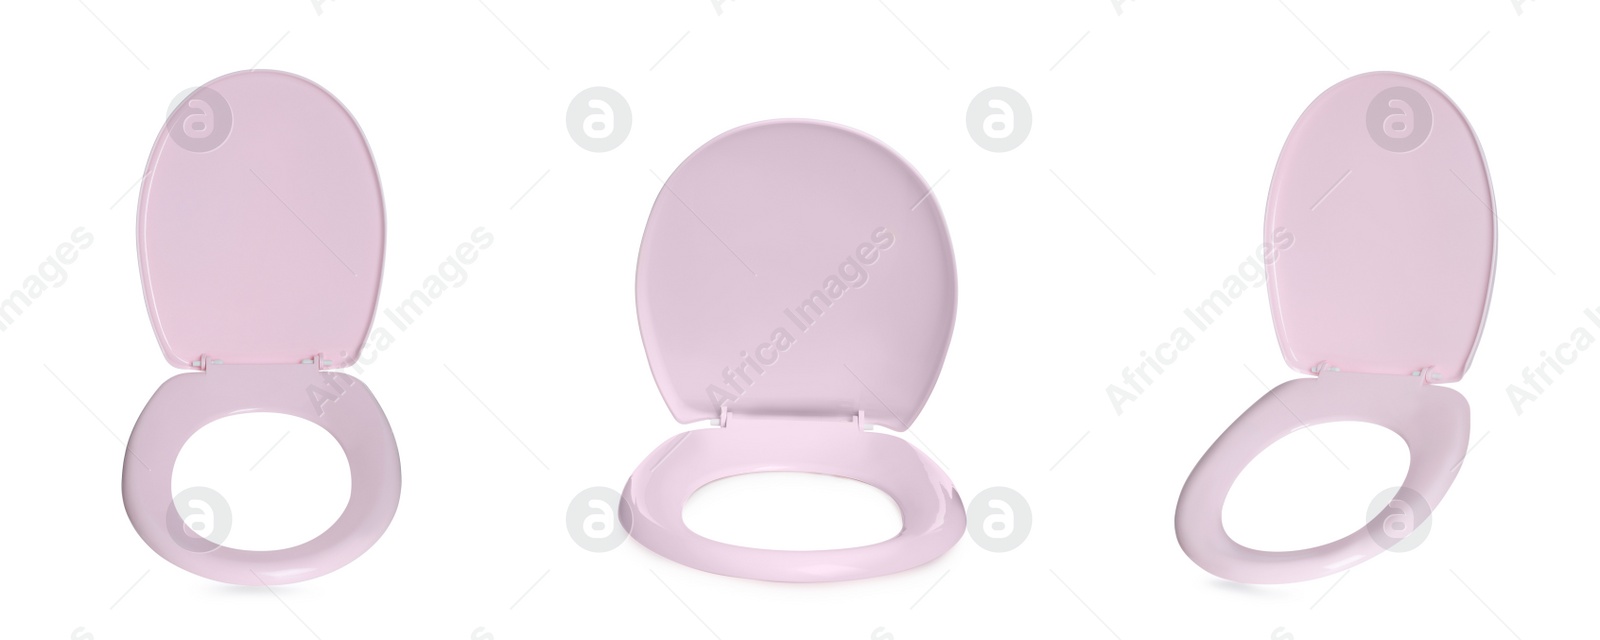 Image of Set with pink plastic toilet seats on white background. Banner design